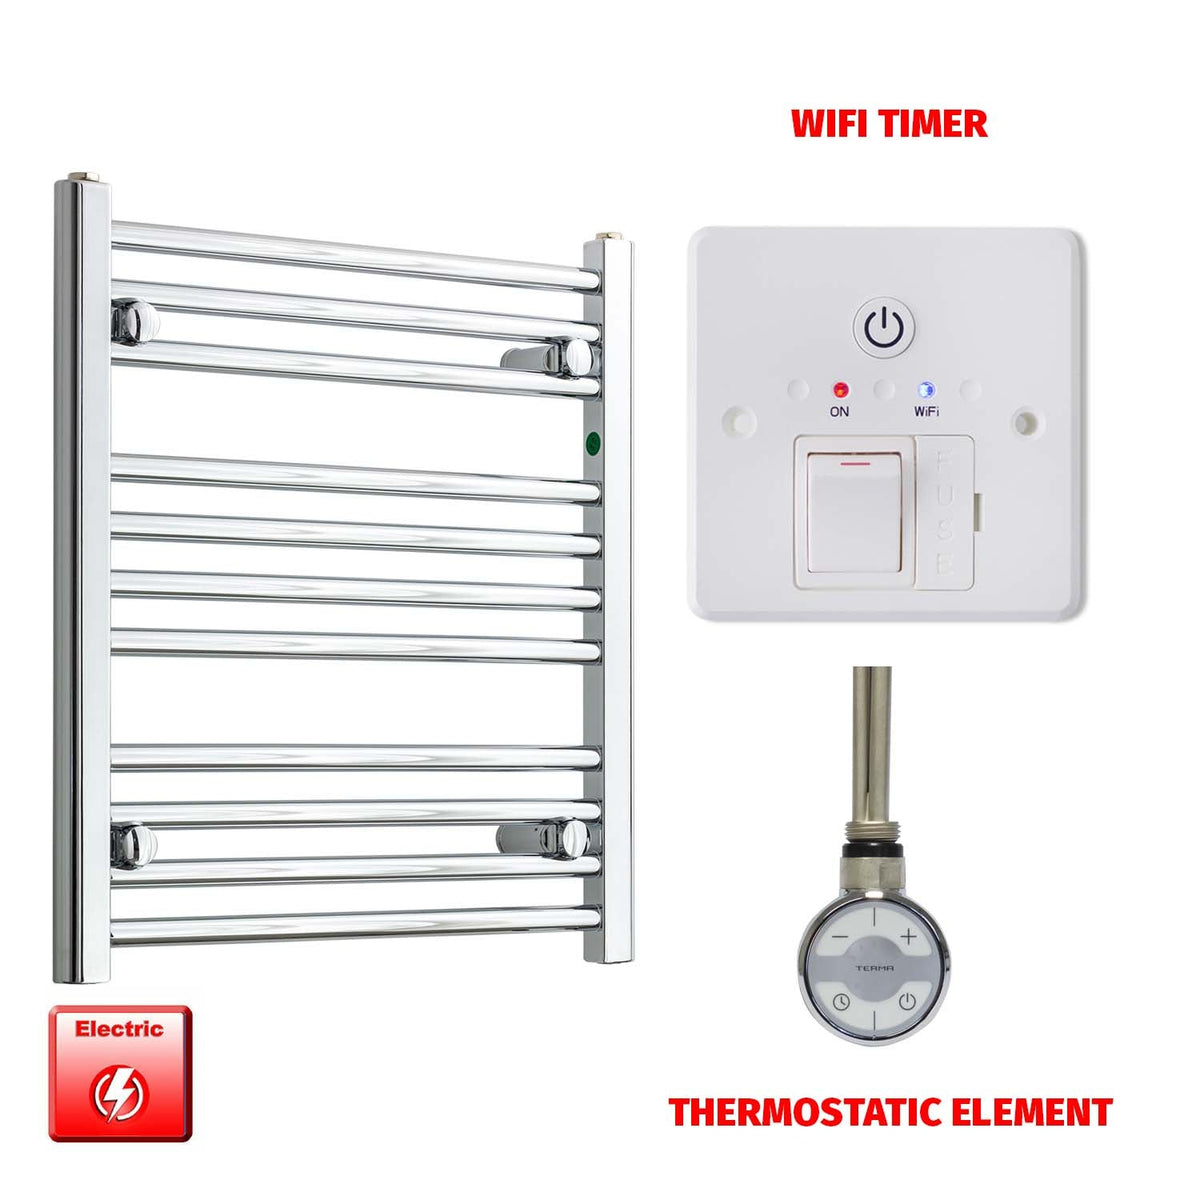 600mm High 500mm Wide Pre-Filled Electric Heated Towel Rail Radiator Straight or Curved Chrome MOA Thermostatic element Wifi timer